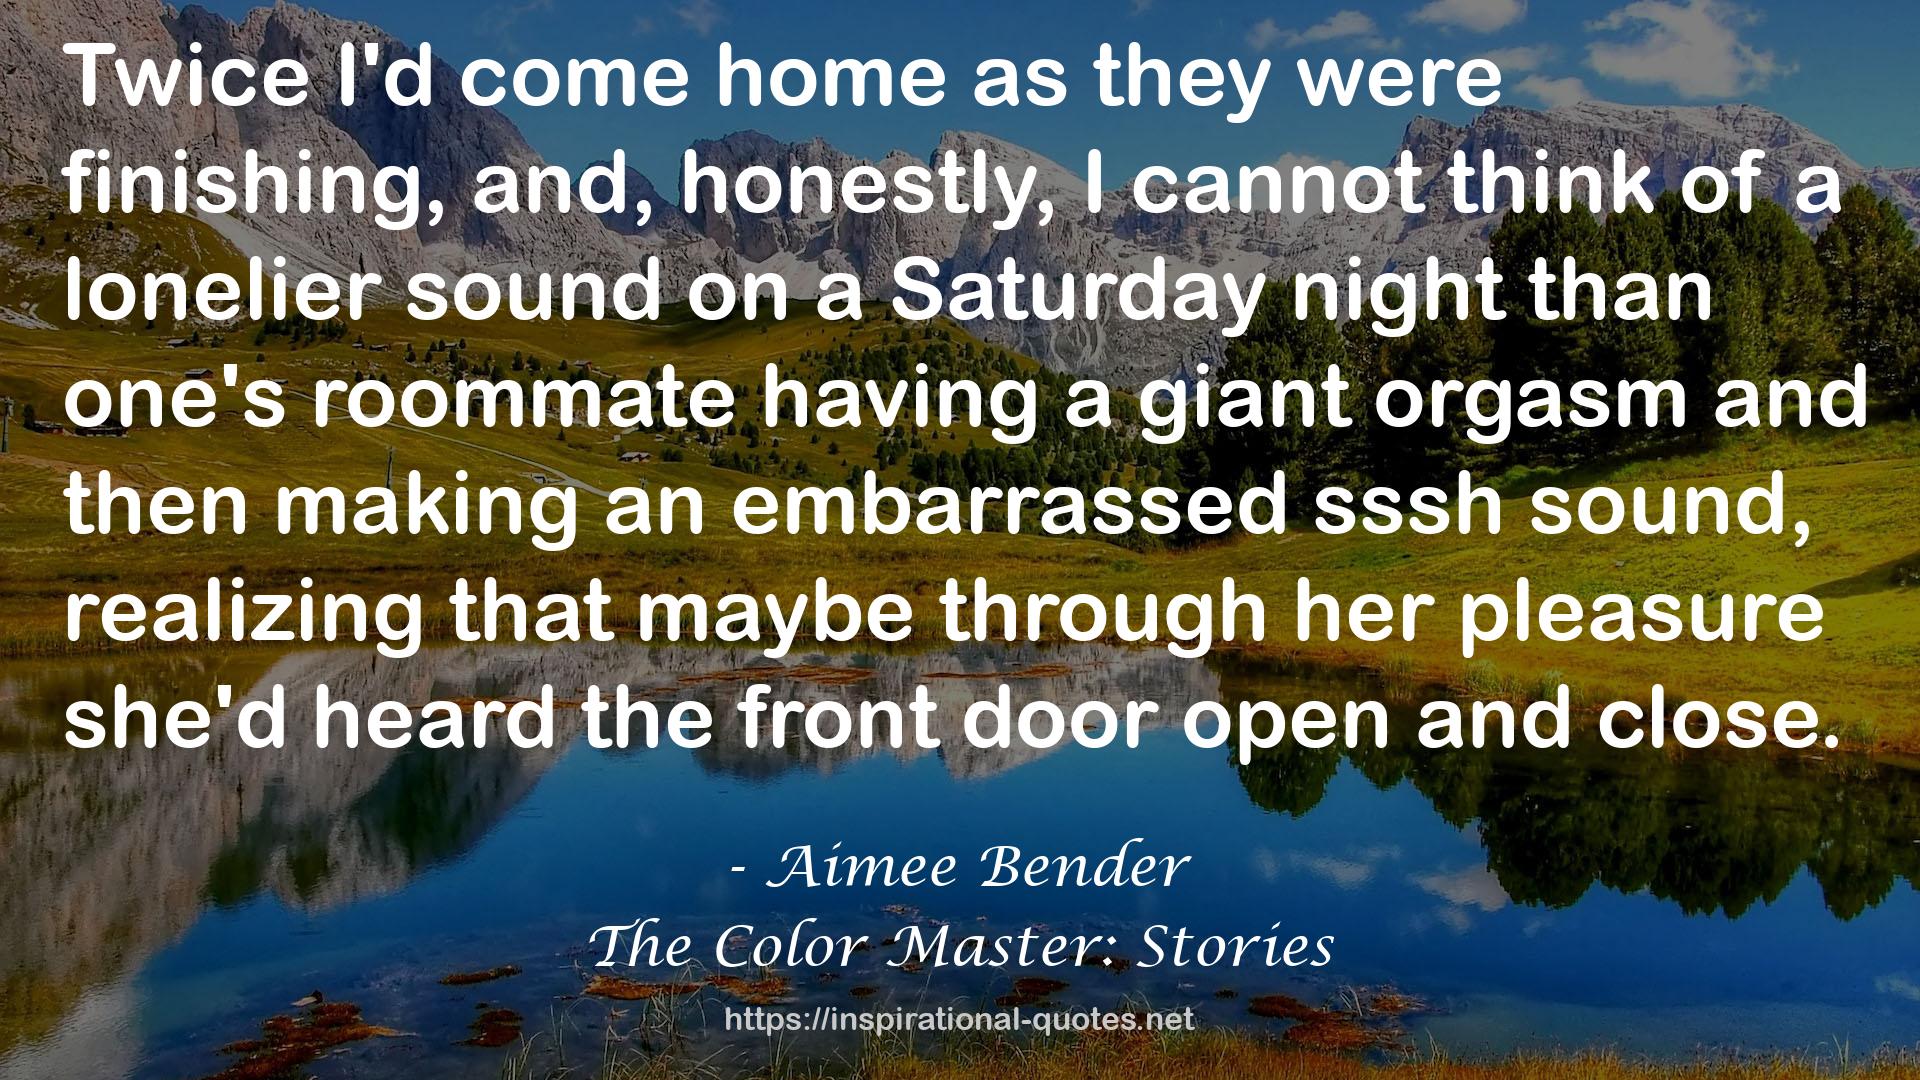 The Color Master: Stories QUOTES